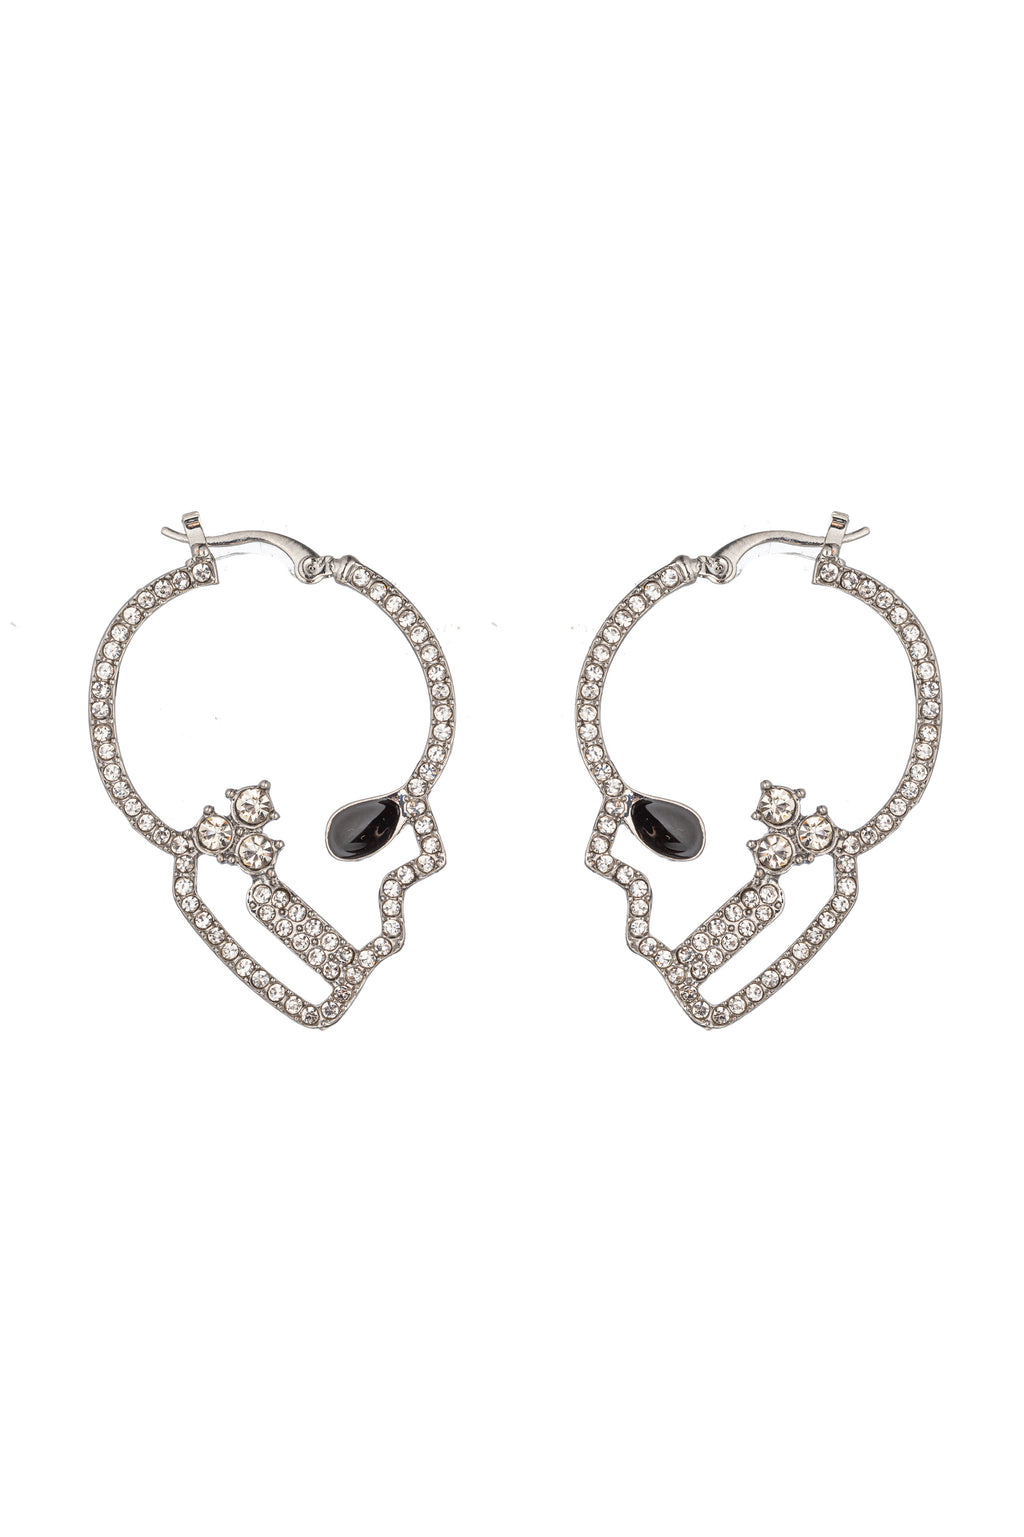 Double skull drop pendant earrings studded with glass crystals.